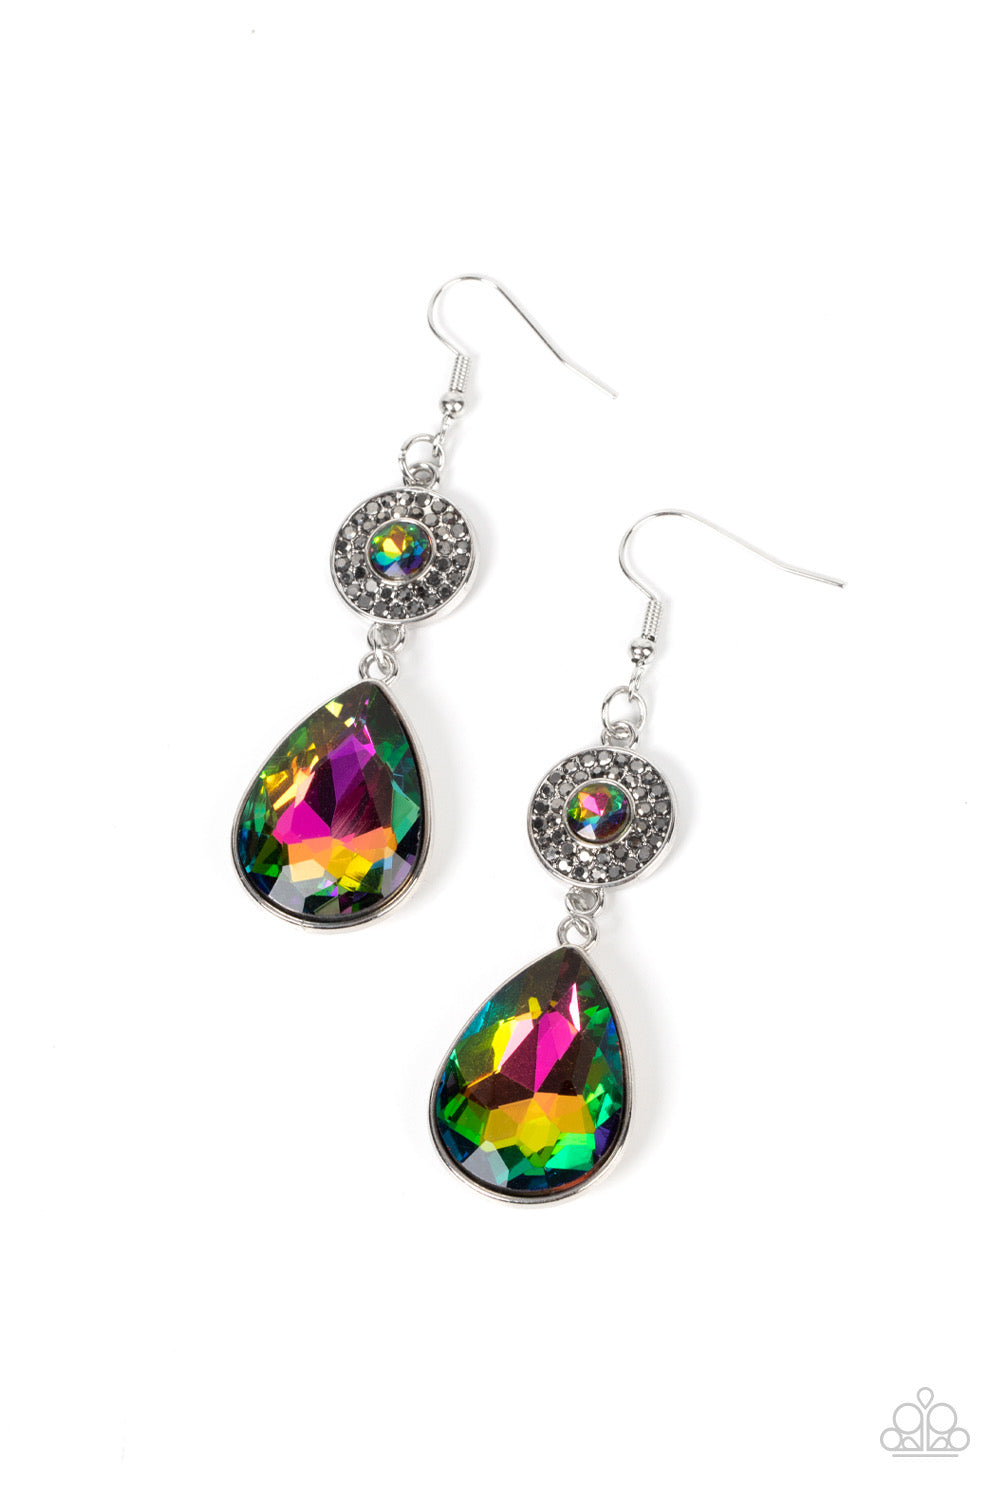 Silver Dangle Earrings - Paparazzi Collecting My Royalties Paparazzi jewelry image